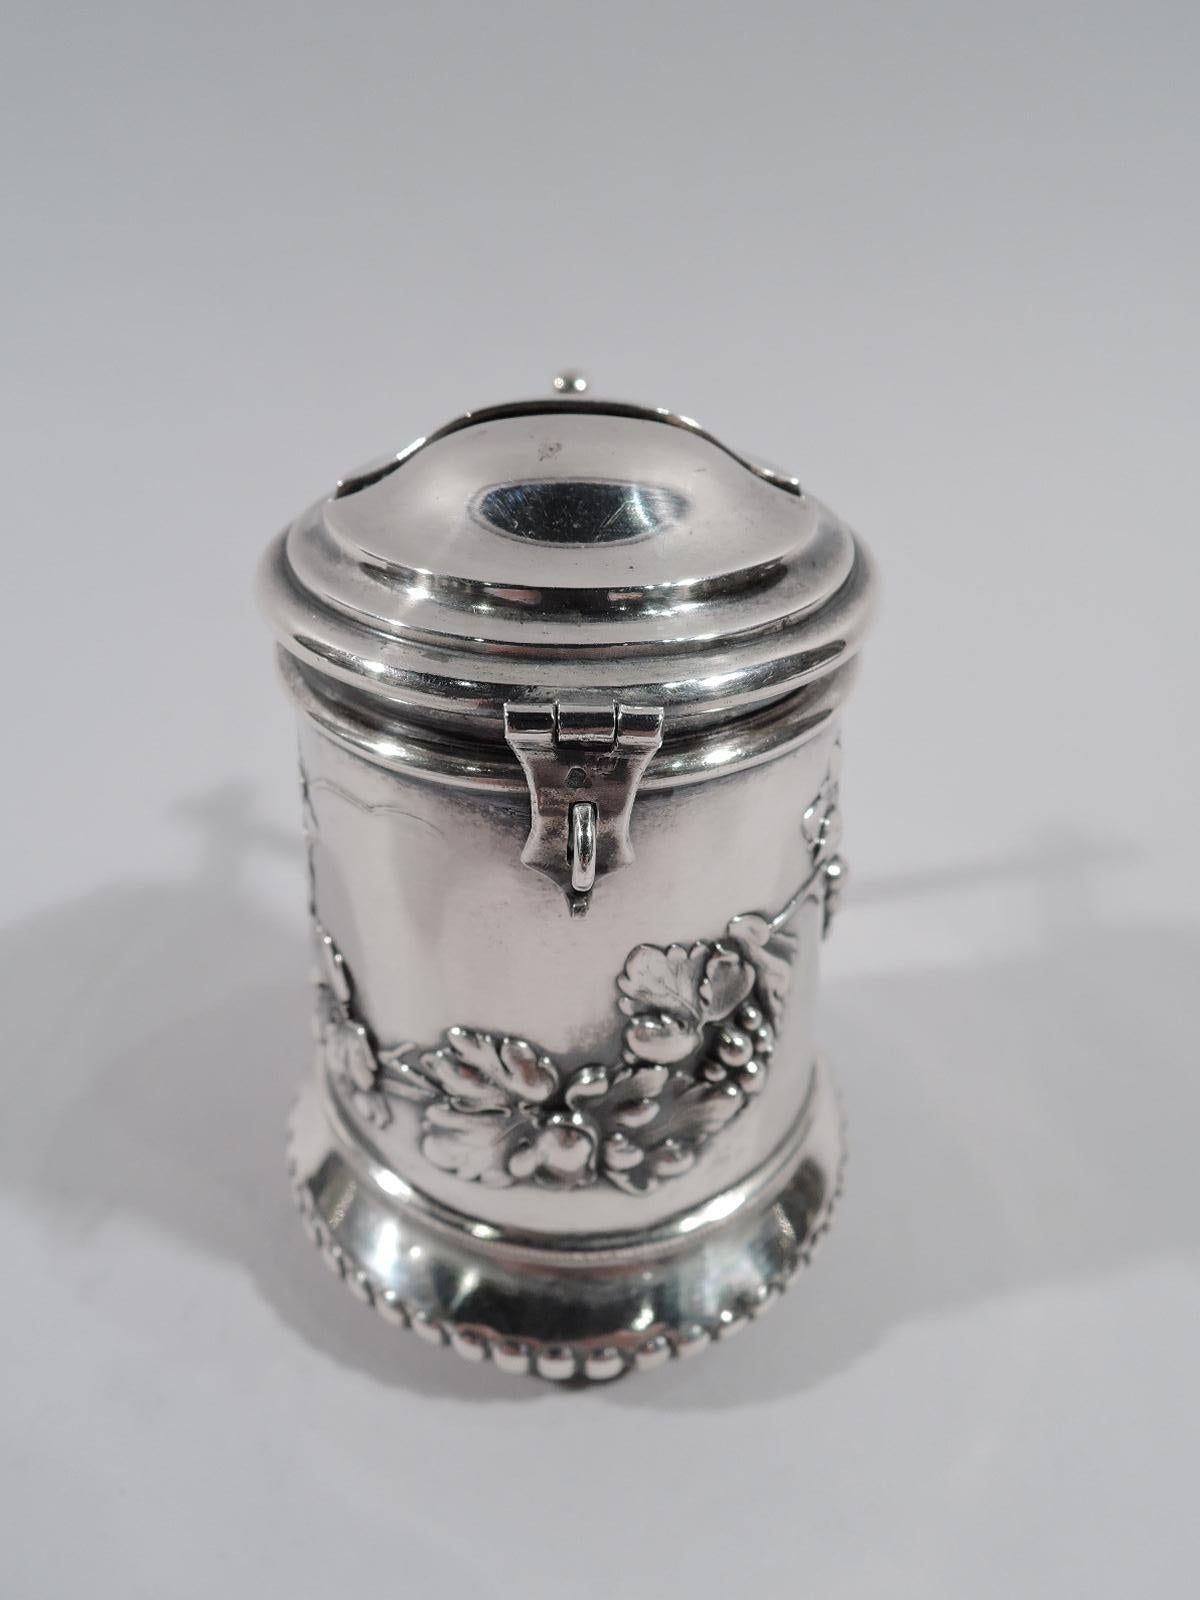 Turn of the century German 800 silver tzedakah (Jewish charity box). Cylindrical with lobed and bellied bottom and mortise Tenon-style bracket handle. Cover hinged and domed with hasp; top has wide slit with loose rings mounted to interior to